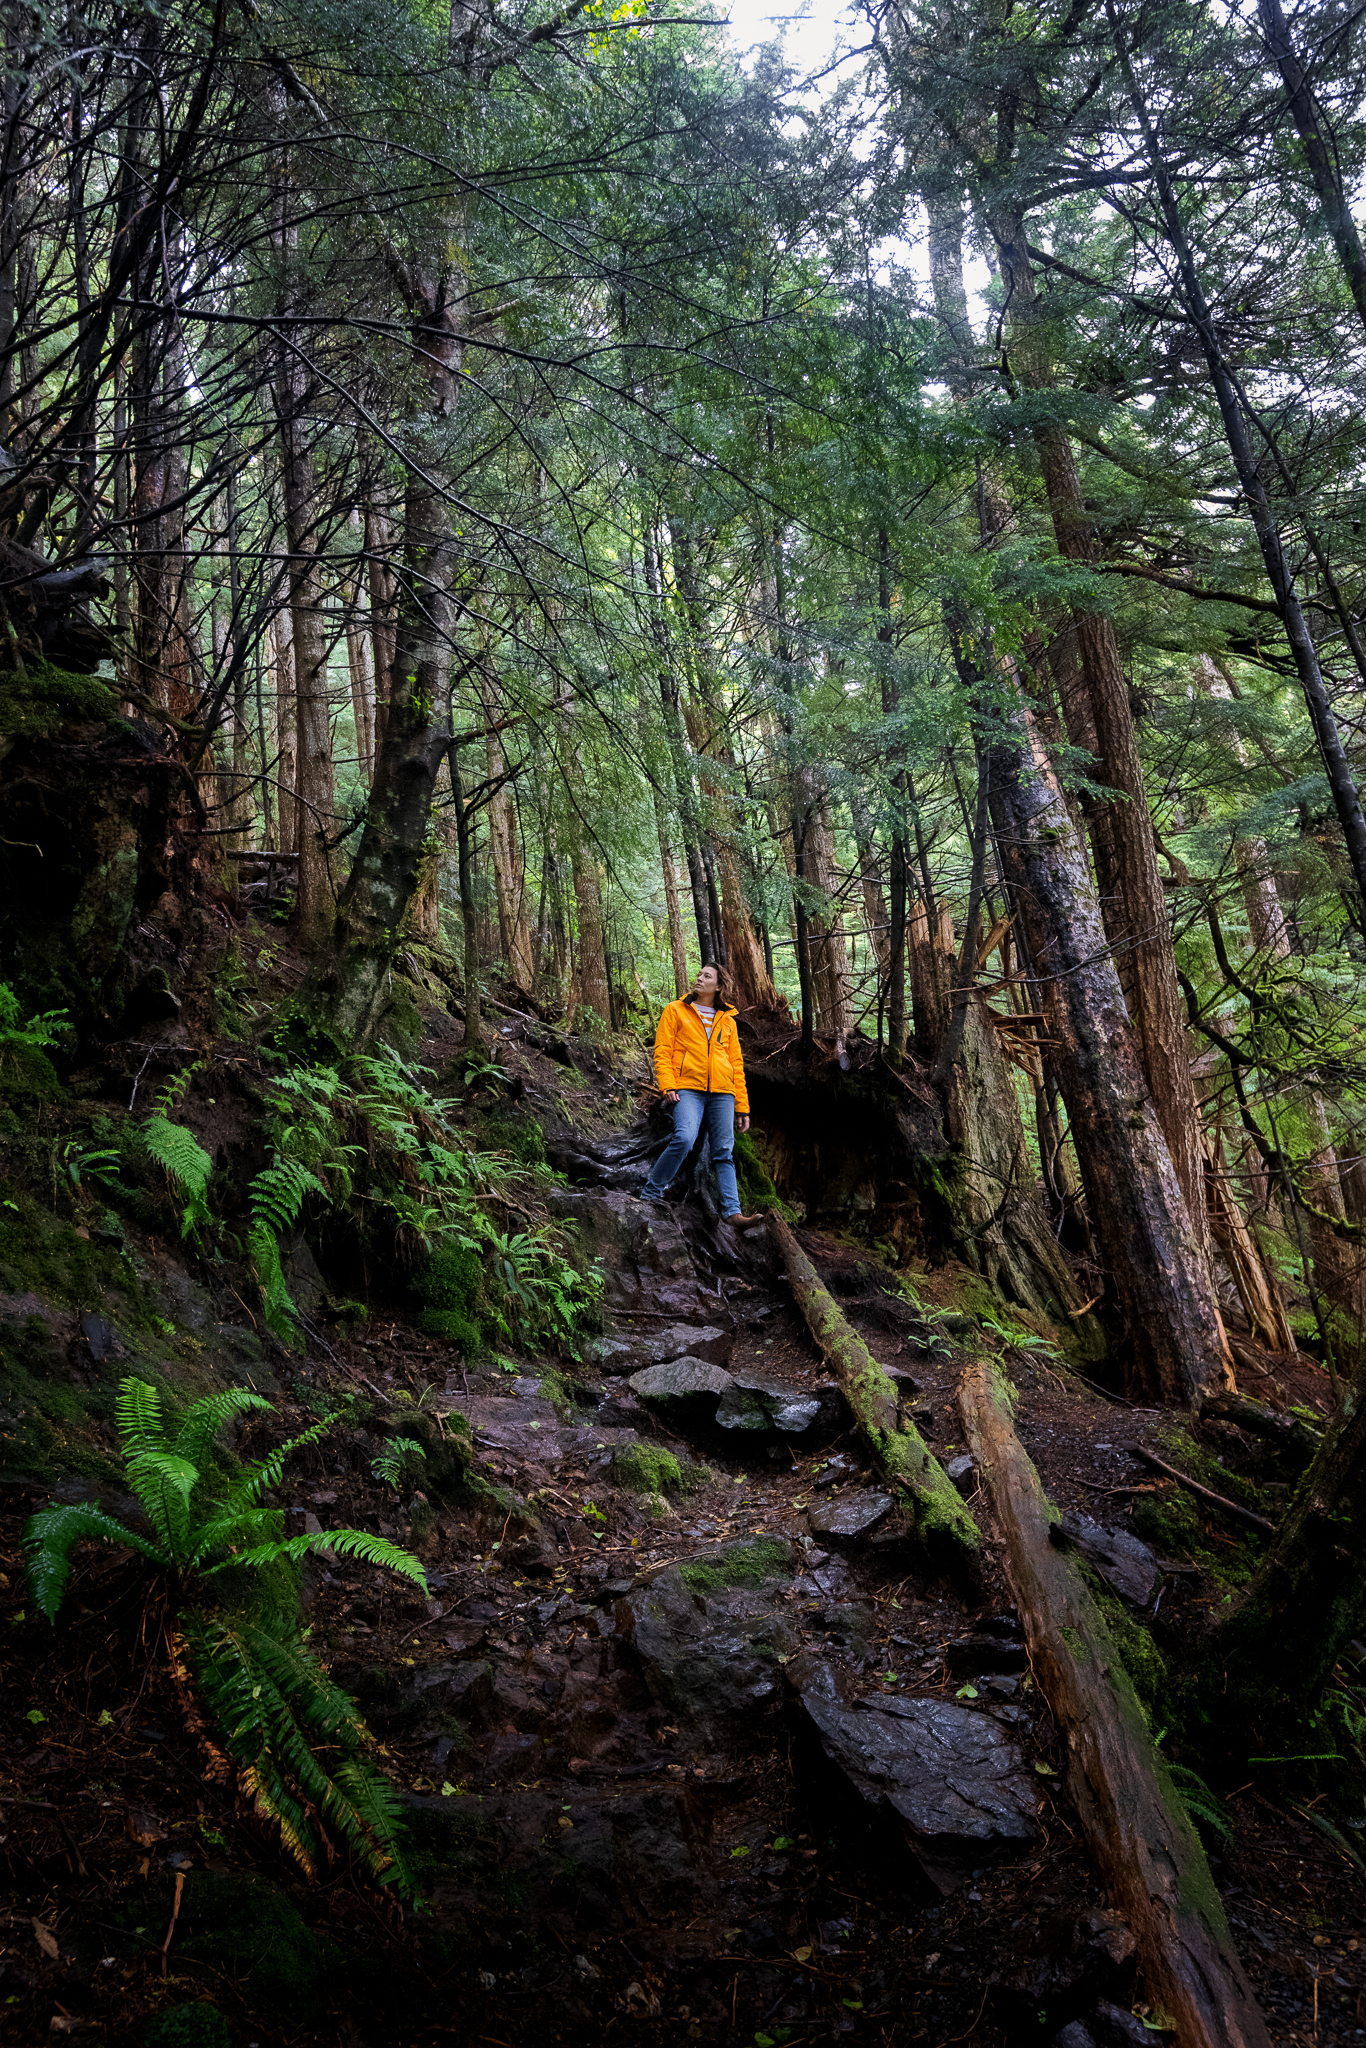 Lindsay, One Girl Wandering, walks in the Tongass National Forest in Ketchikan Alaska